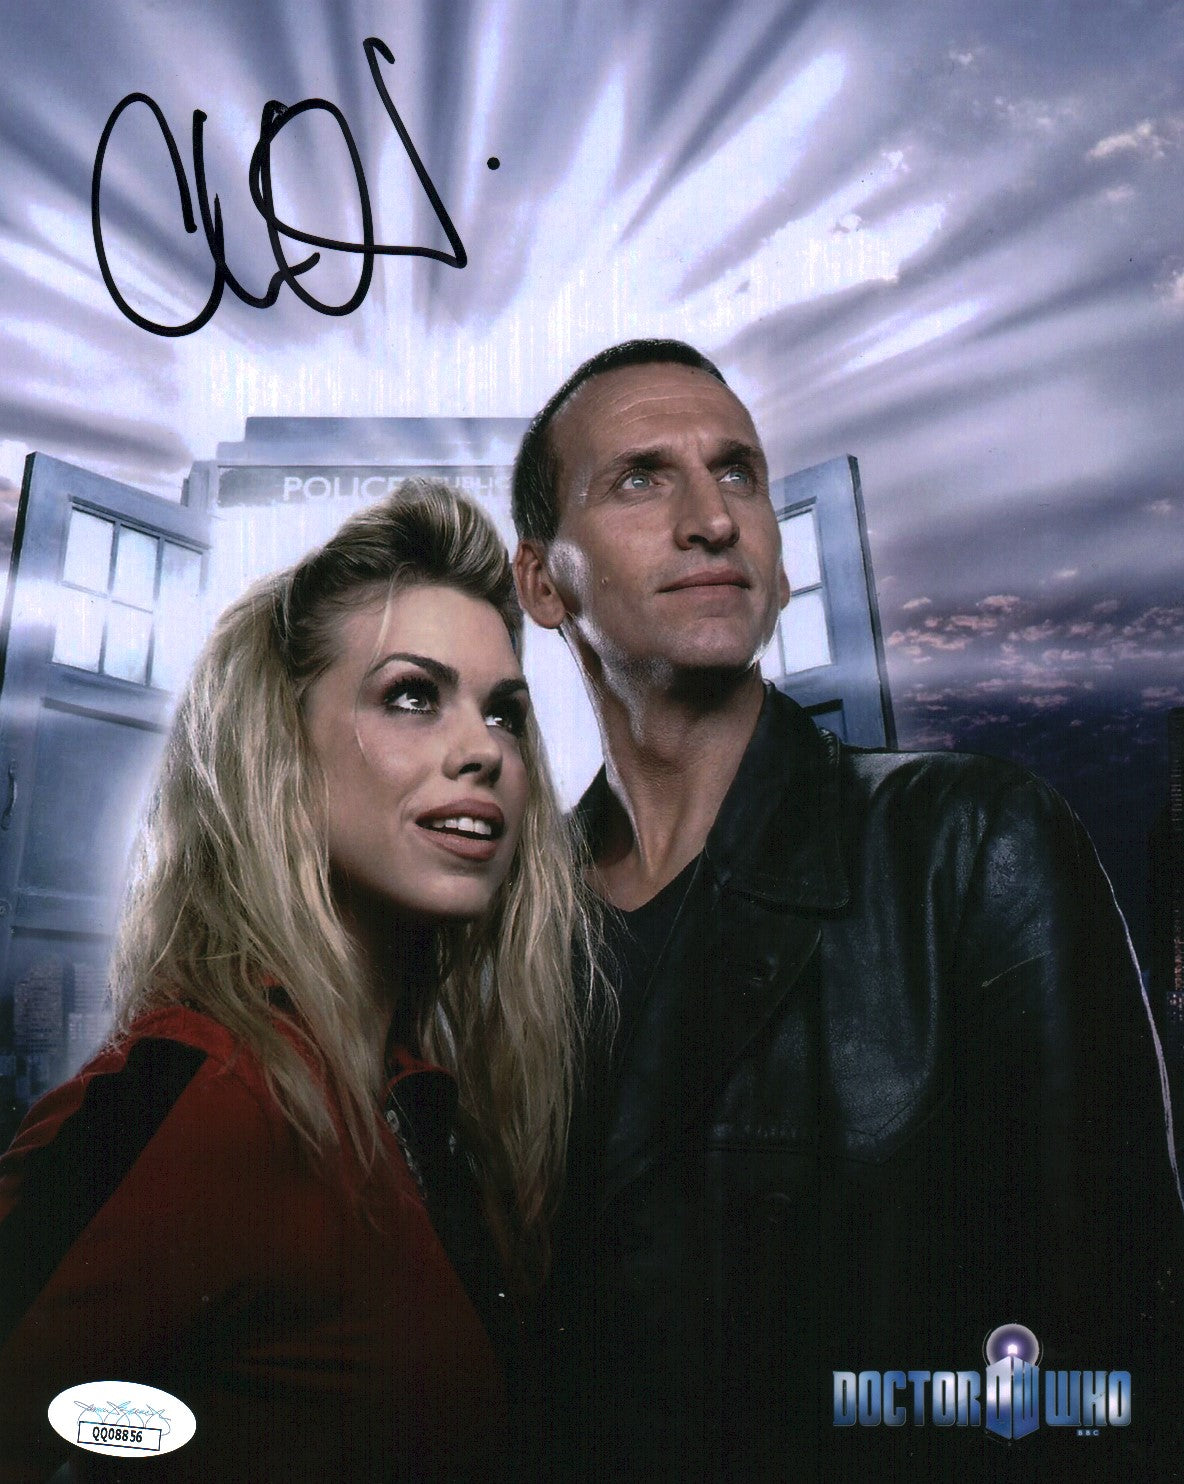 Christopher Eccleston Doctor Who 8x10 Signed Photo JSA Certified Autograph GalaxyCon